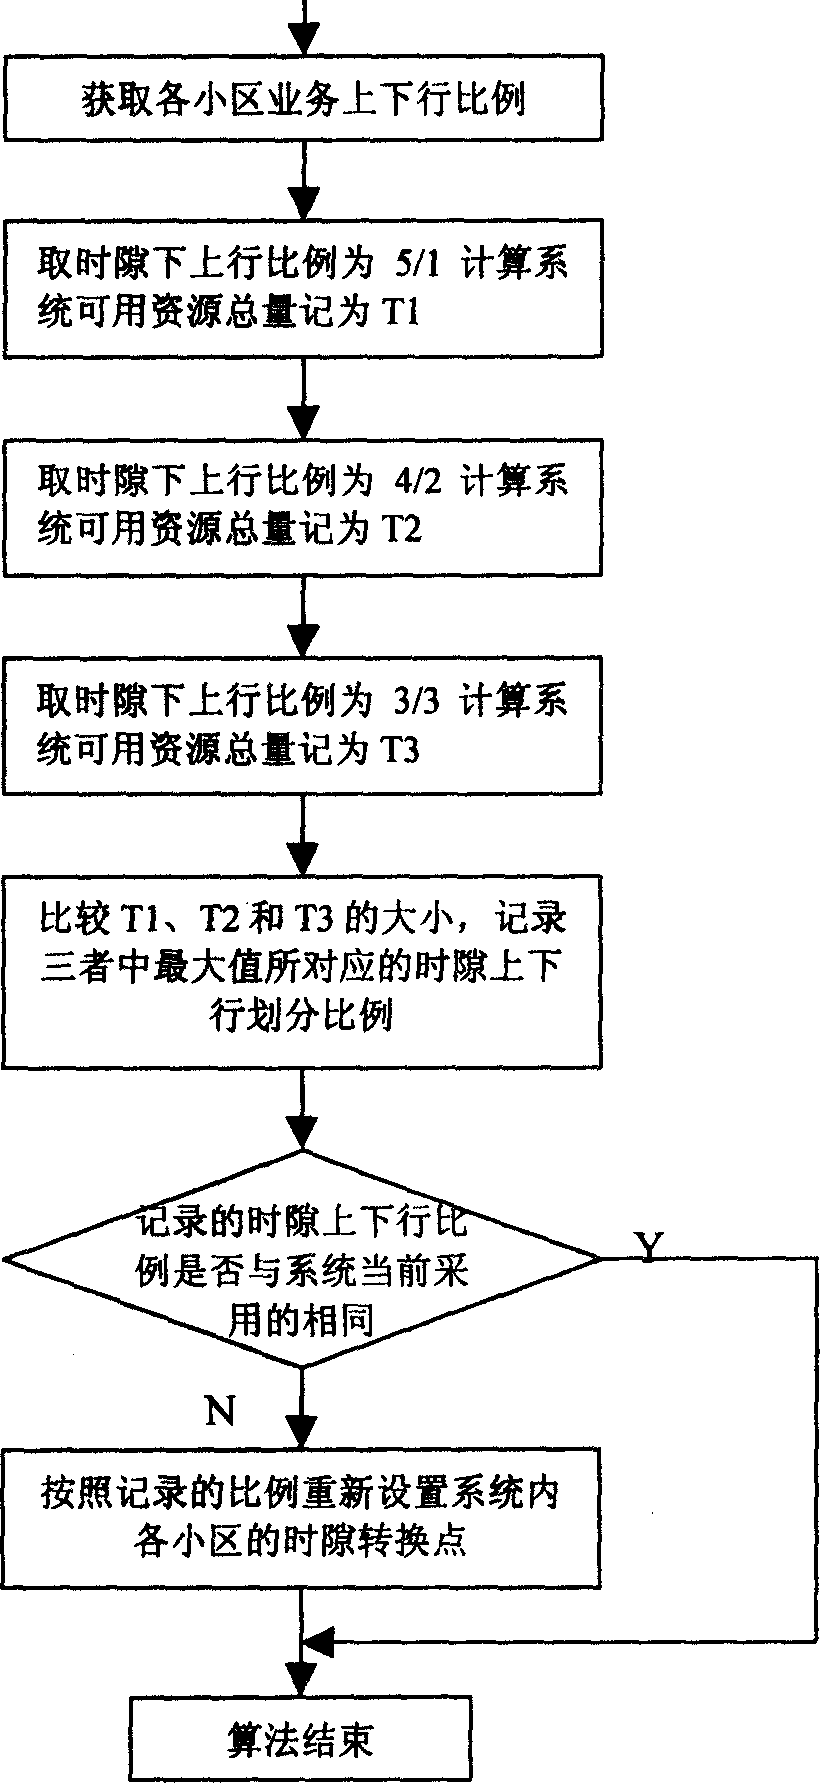 Method and apparatus for upstream and downstream resource allocation in time division duplexing mobile communication system